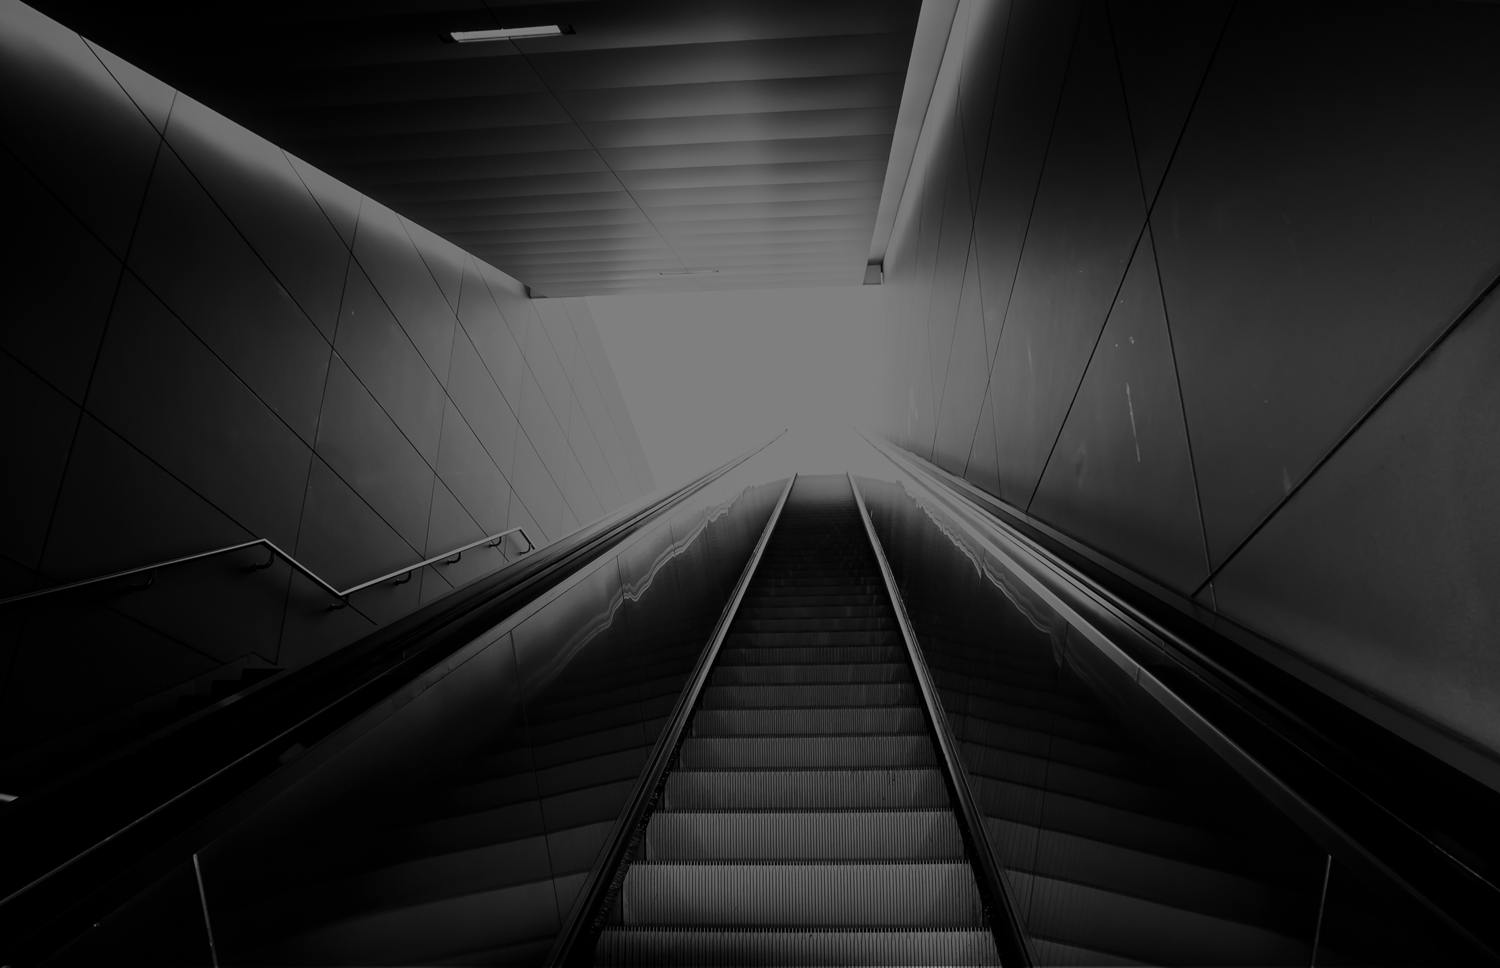 escalators go to a lighted exit to find new solutions